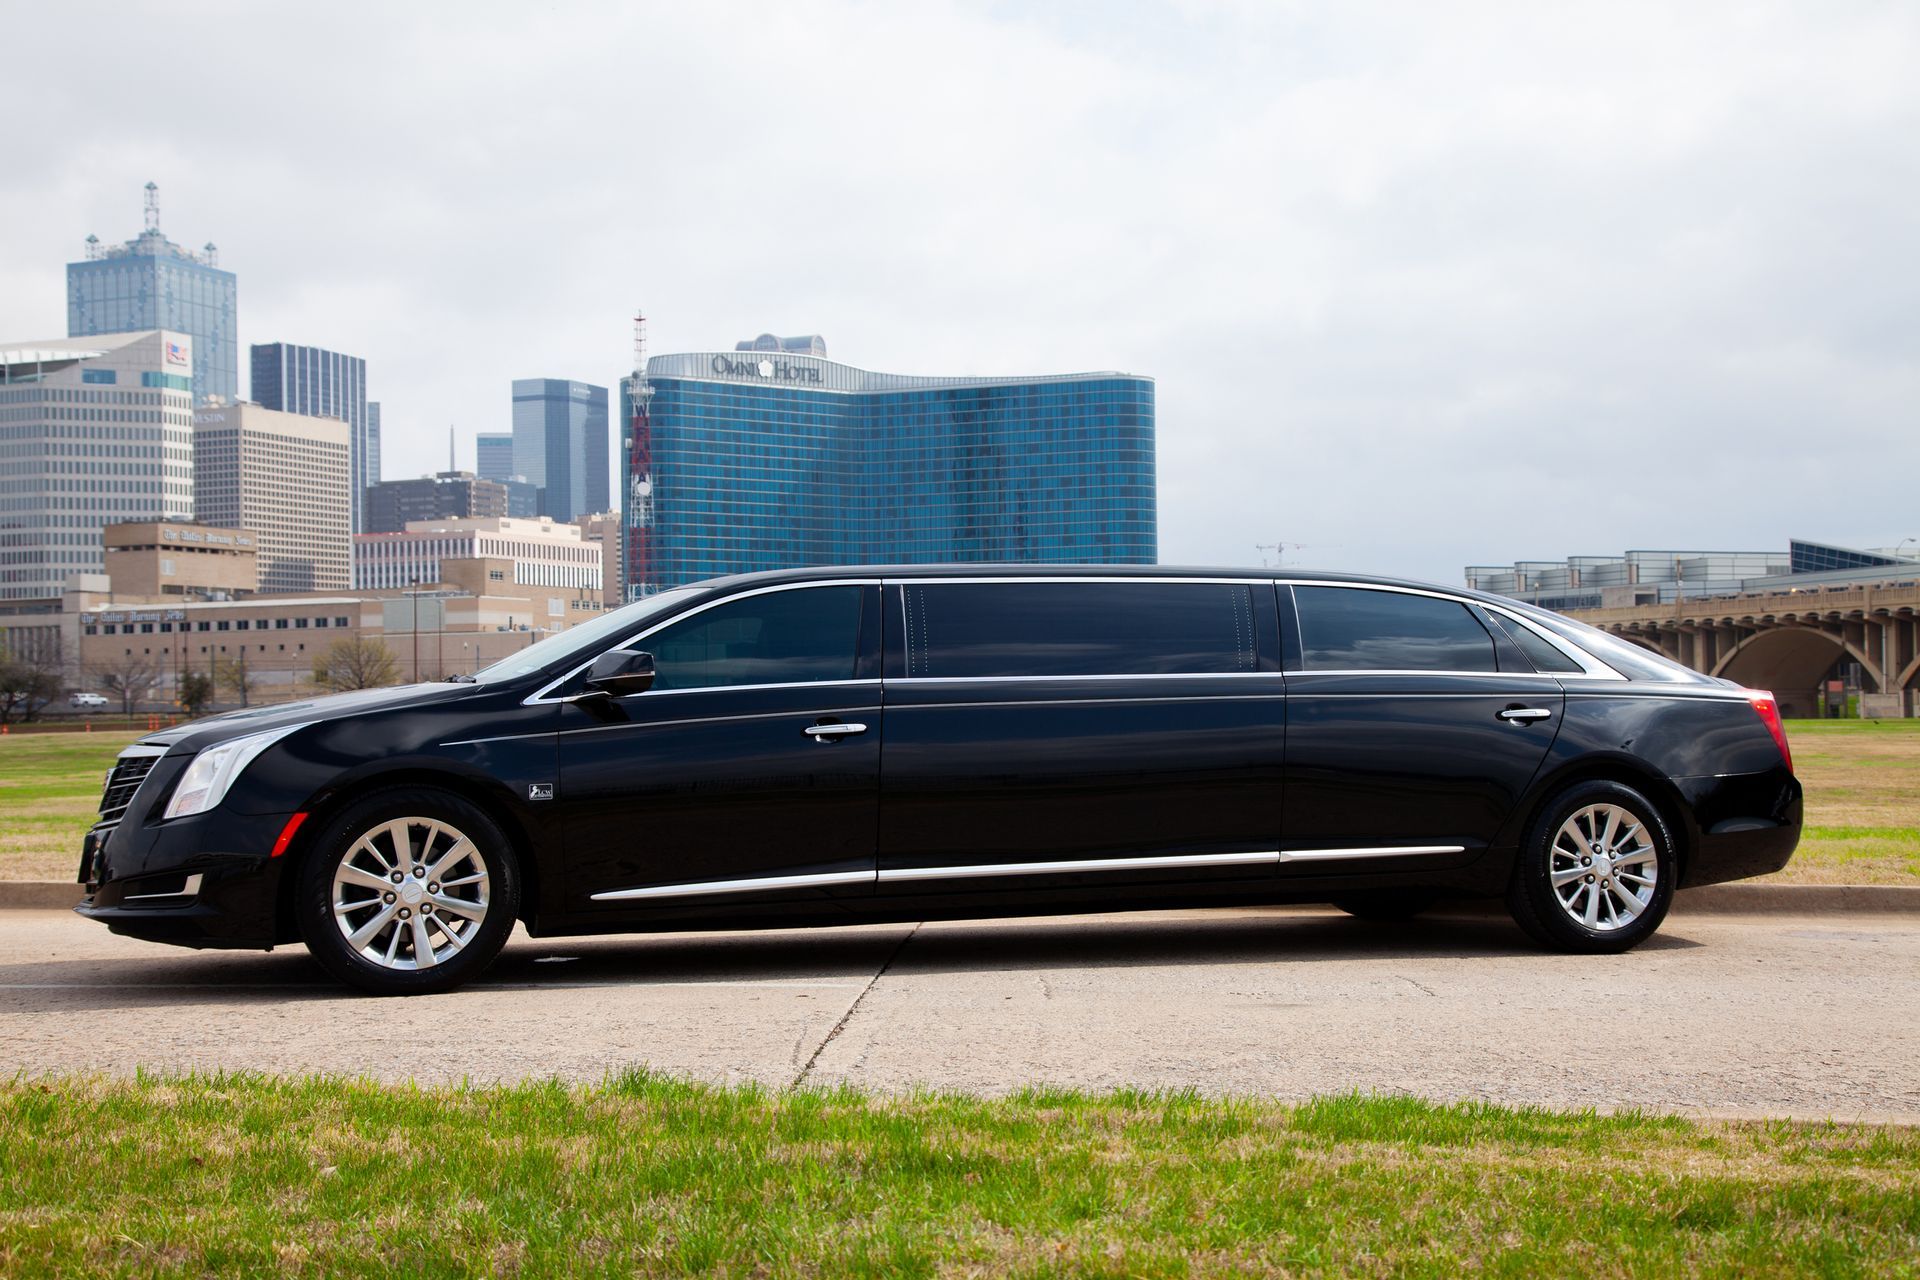 premier's black limousine is parked on the side of the road in front of a city skyline